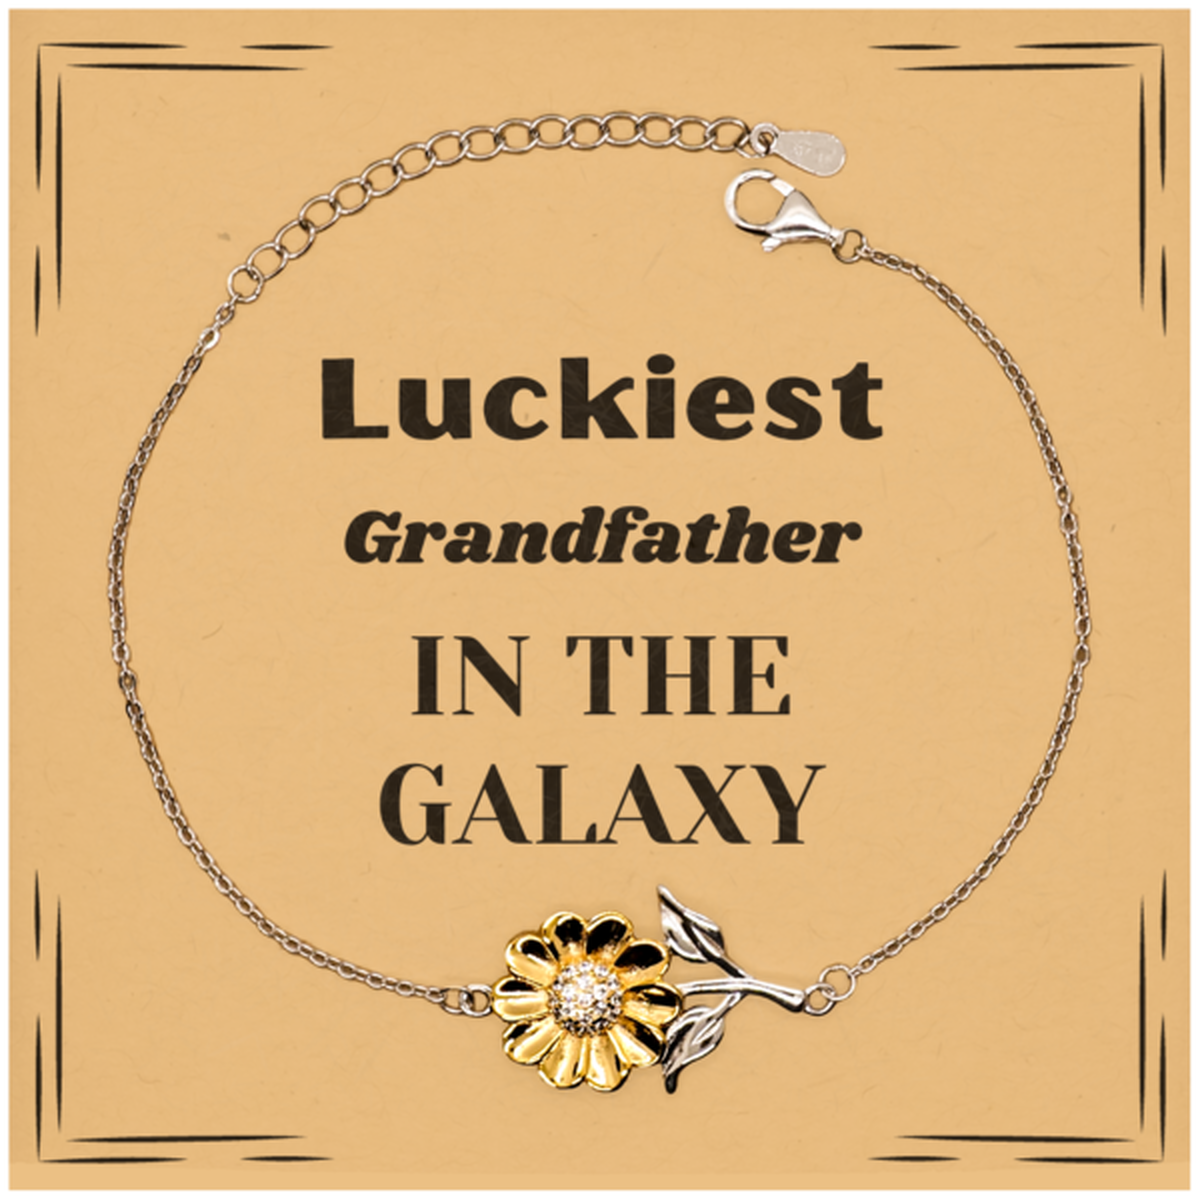 Luckiest Grandfather in the Galaxy, To My Grandfather Message Card Gifts, Christmas Grandfather Sunflower Bracelet Gifts, X-mas Birthday Unique Gifts For Grandfather Men Women